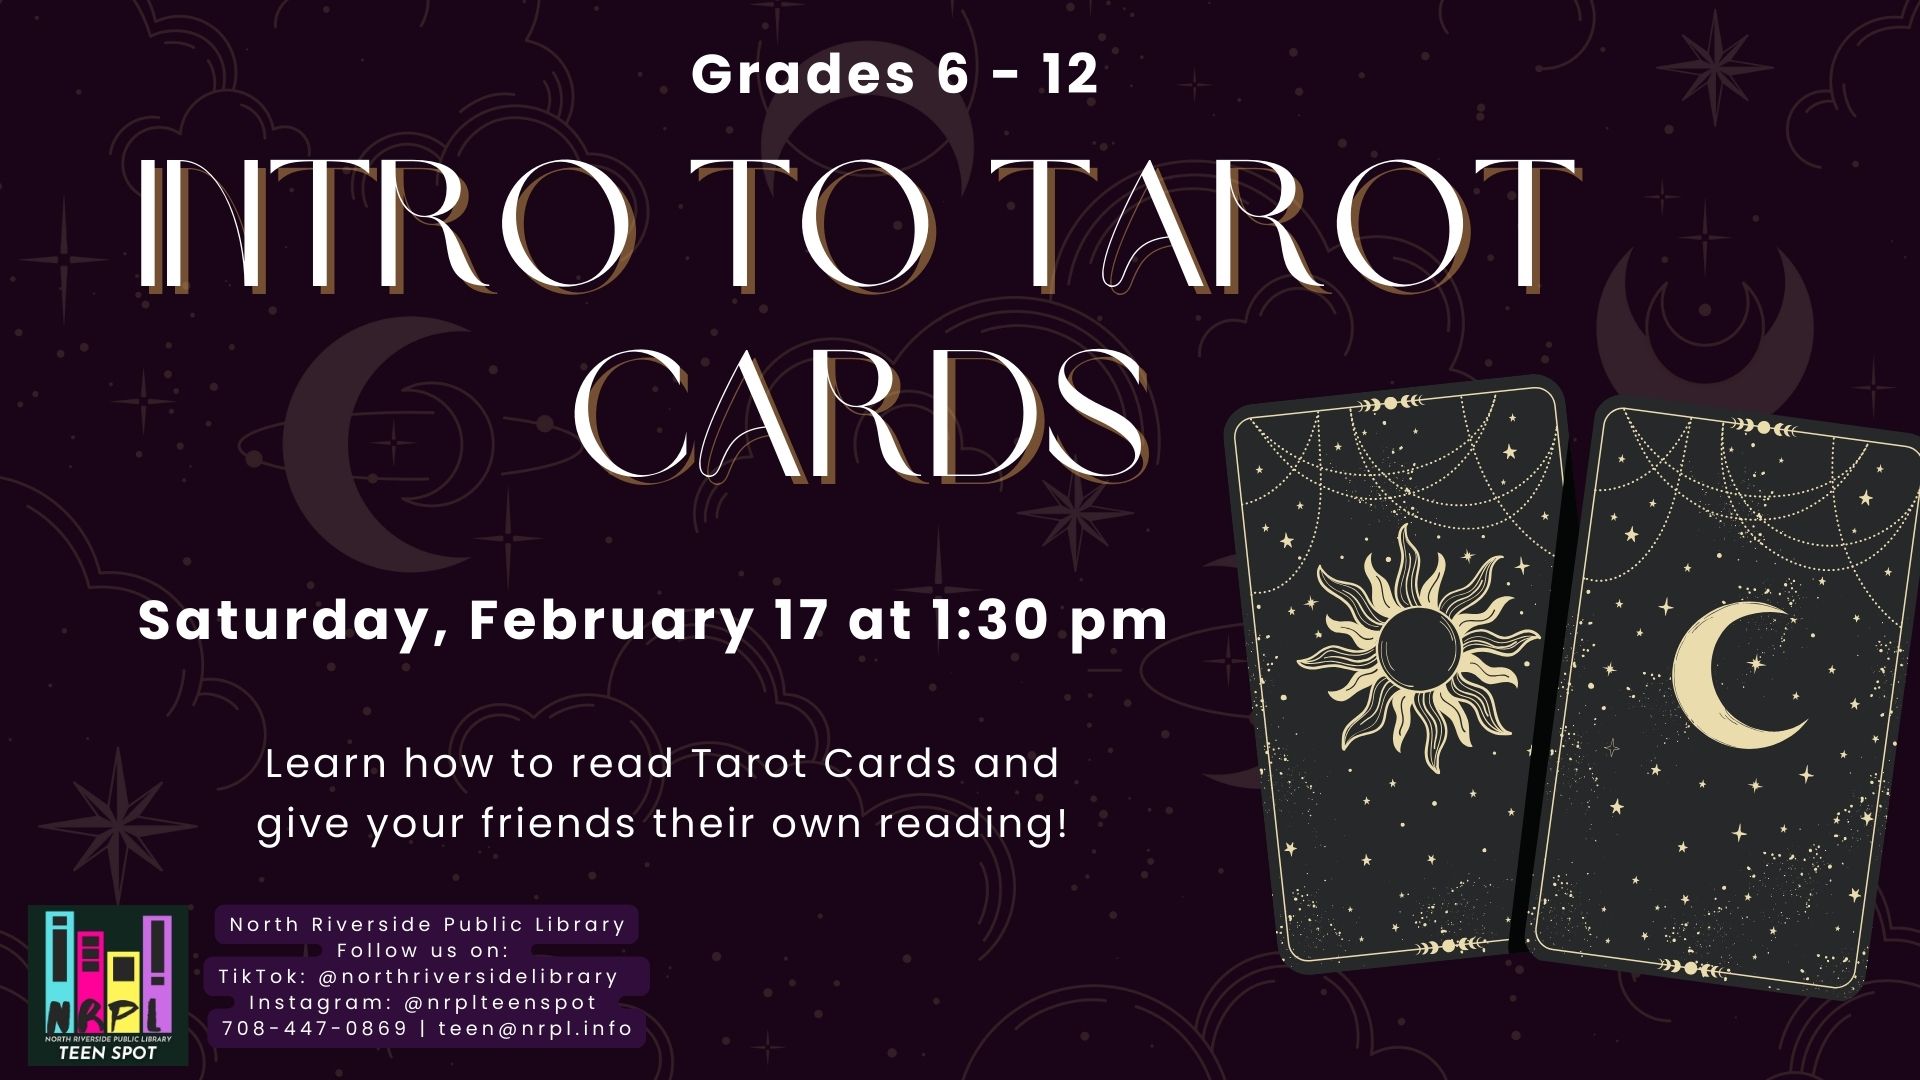 Intro to tarot cards for teens program flyer